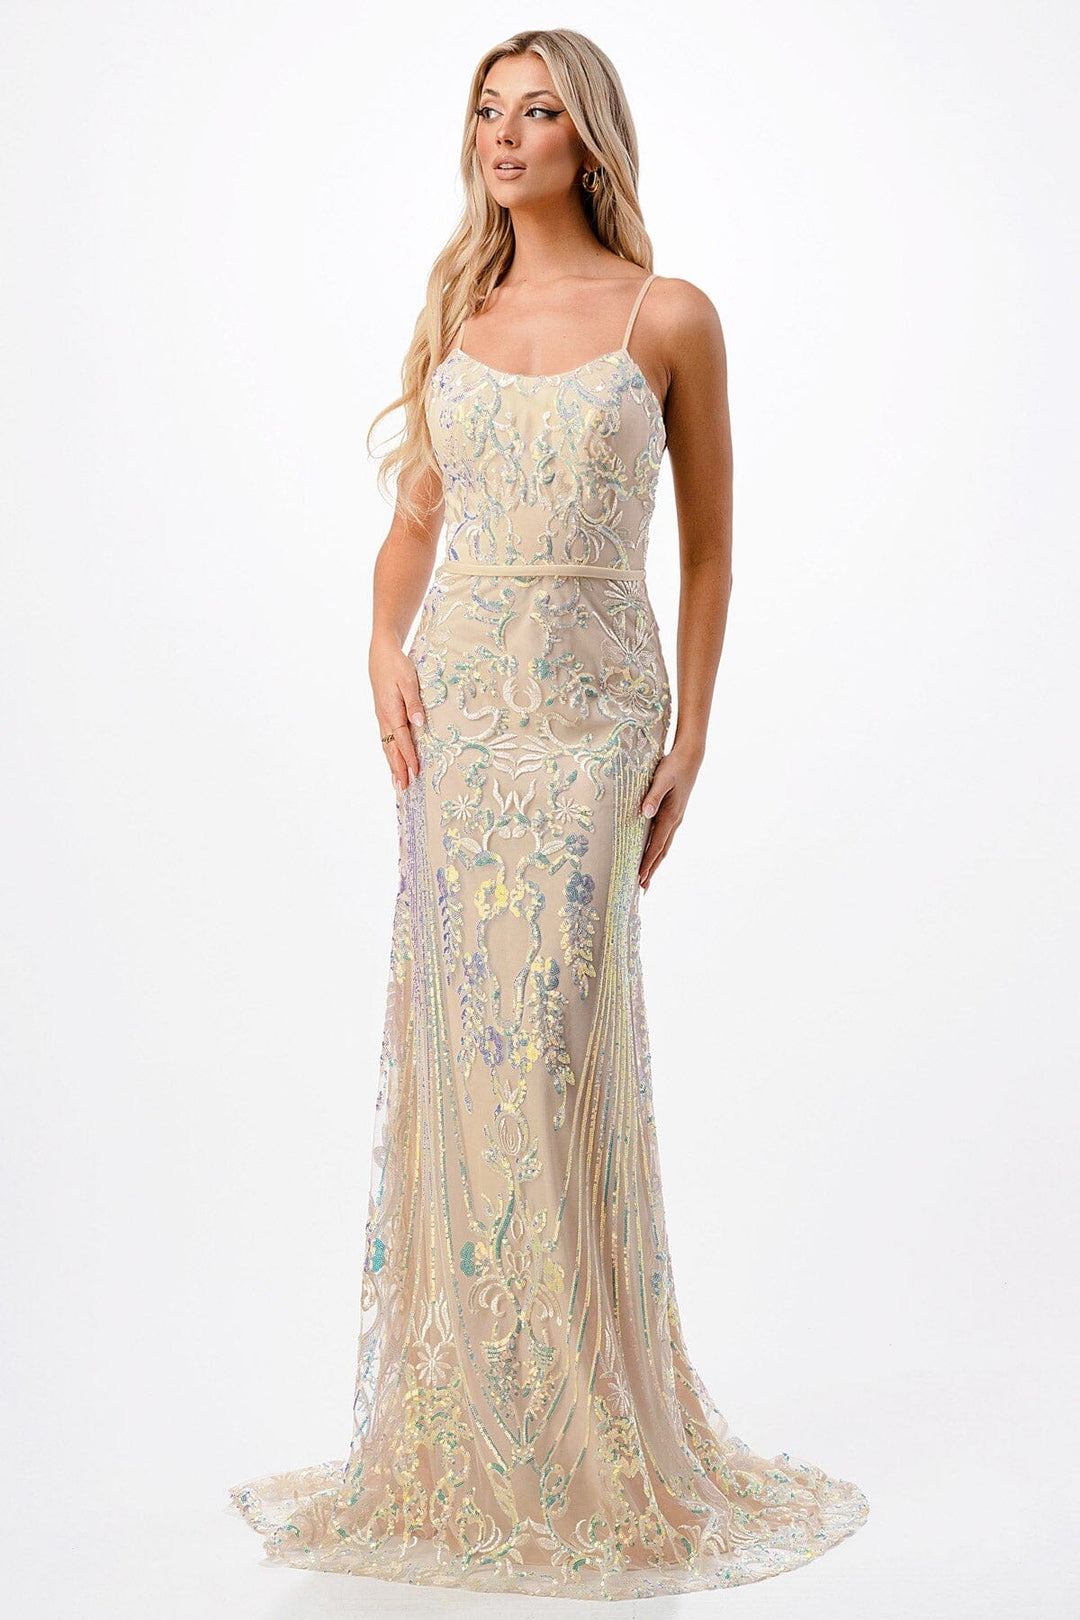 Sequin Applique Fitted Sleeveless Gown by Coya P2116